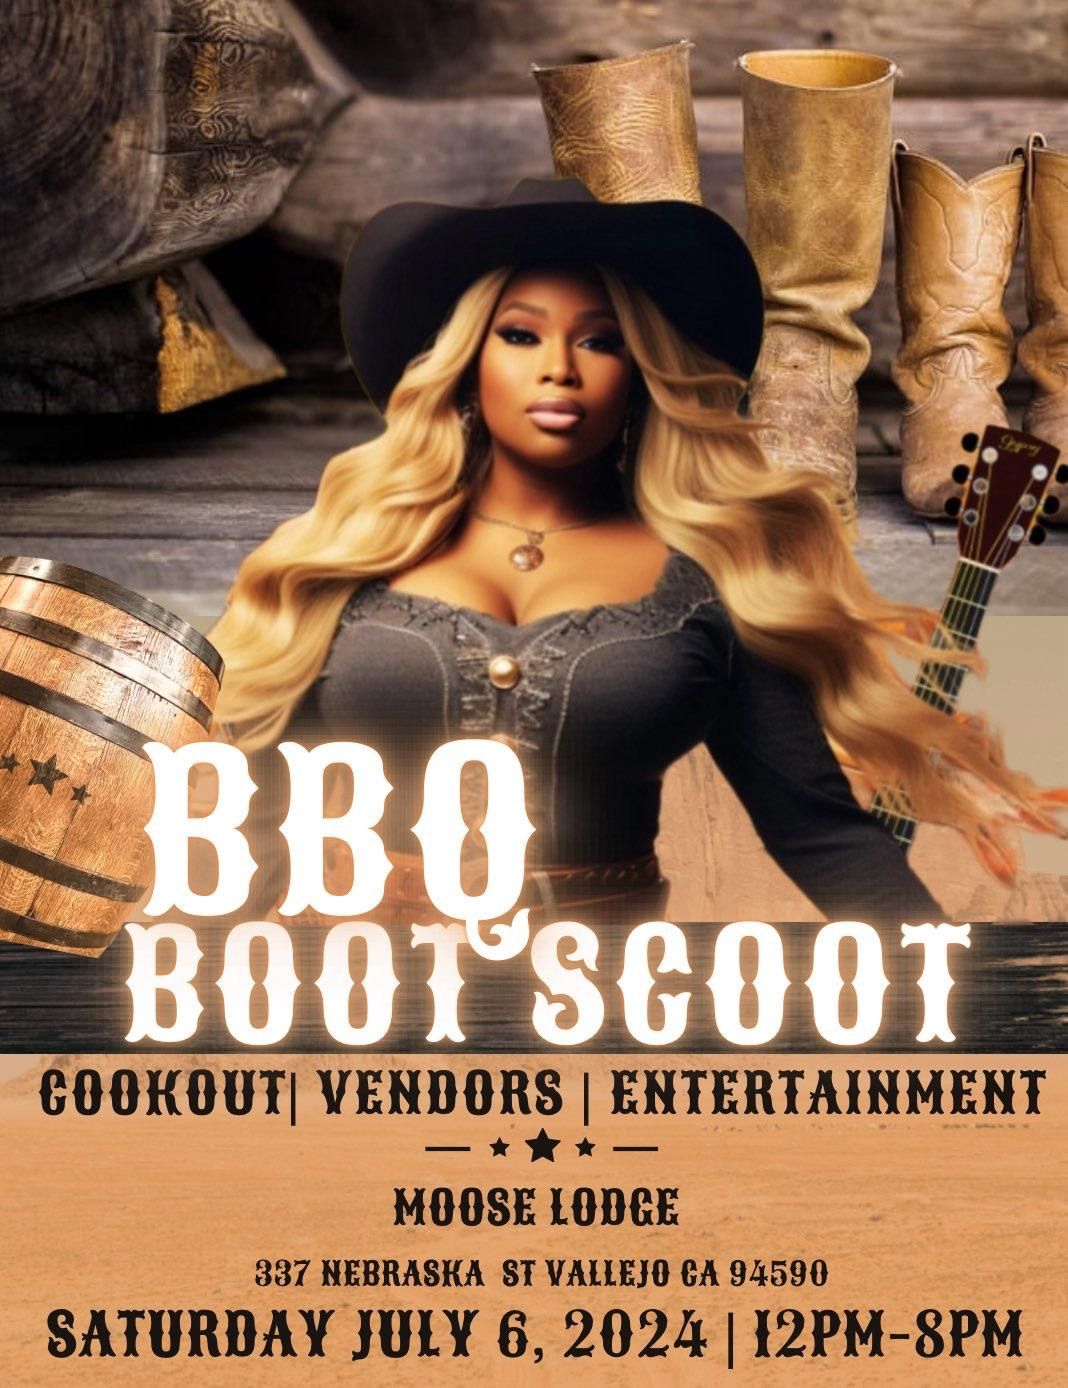 BBQ BOOTS SCOOT